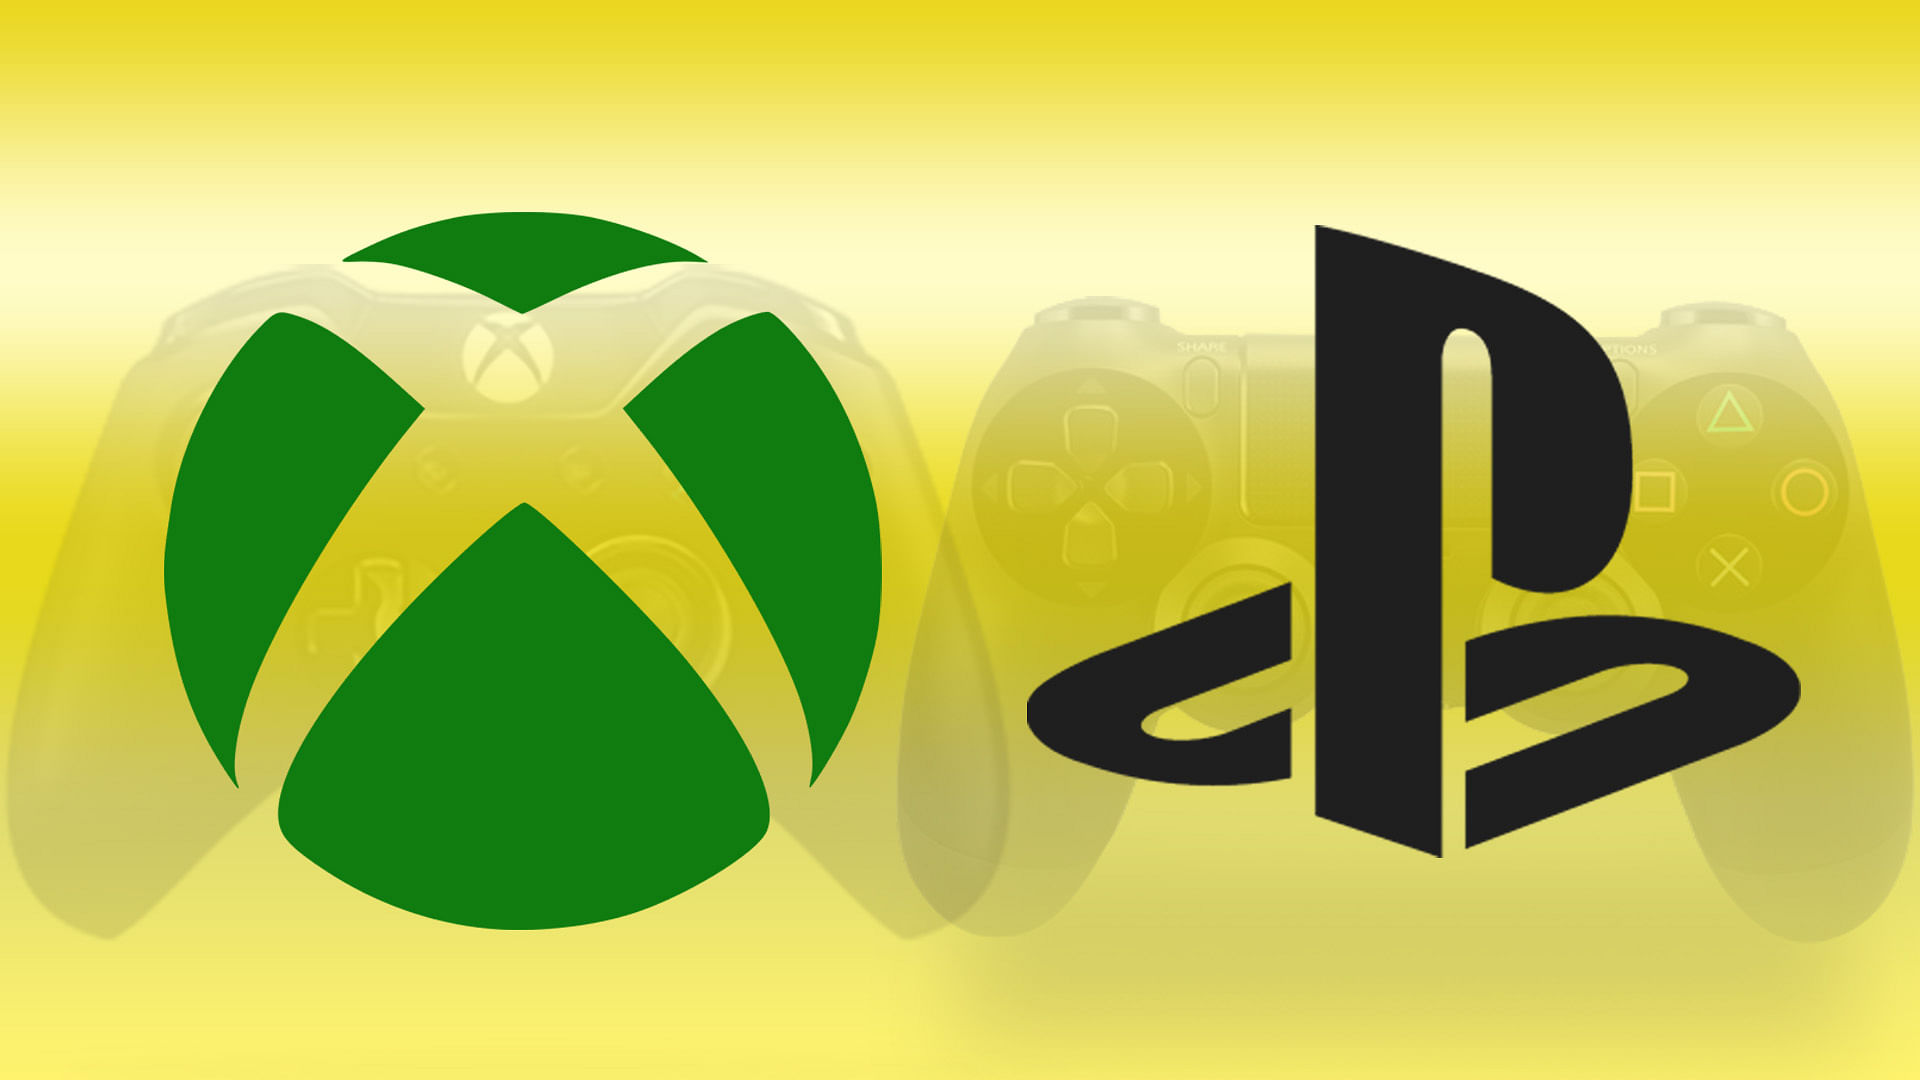 Both Microsoft and Sony are expected to launch their respective gaming consoles next year.